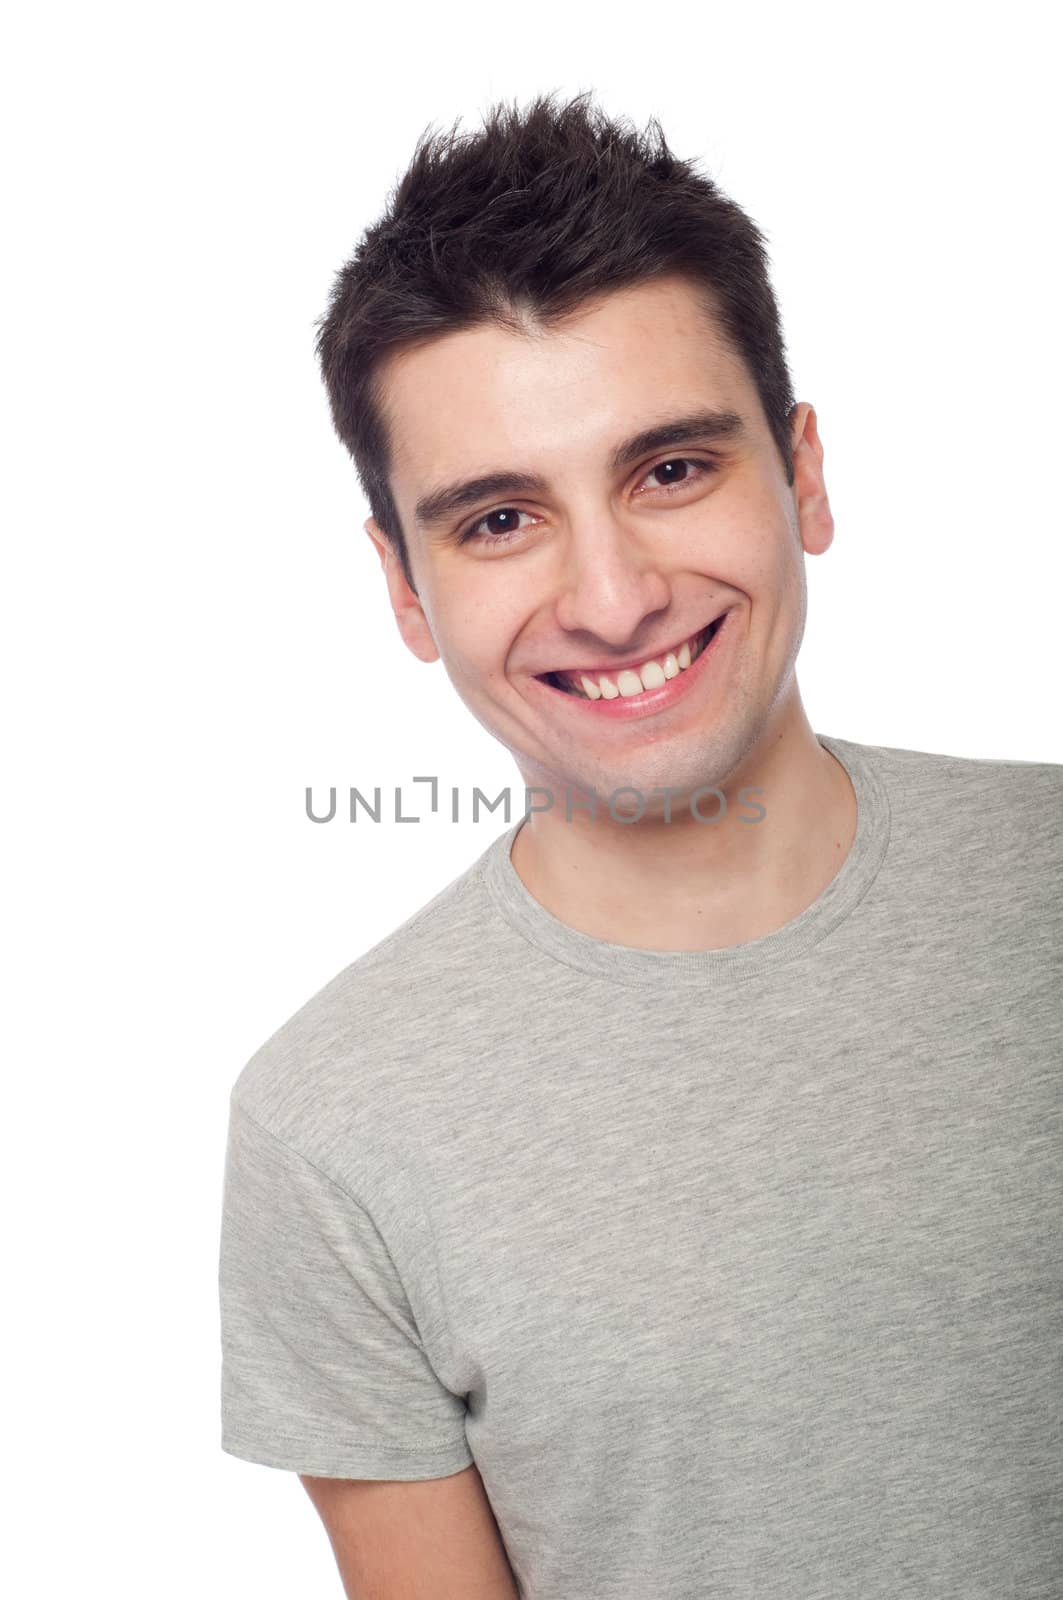 young casual man portrait isolated on white background 